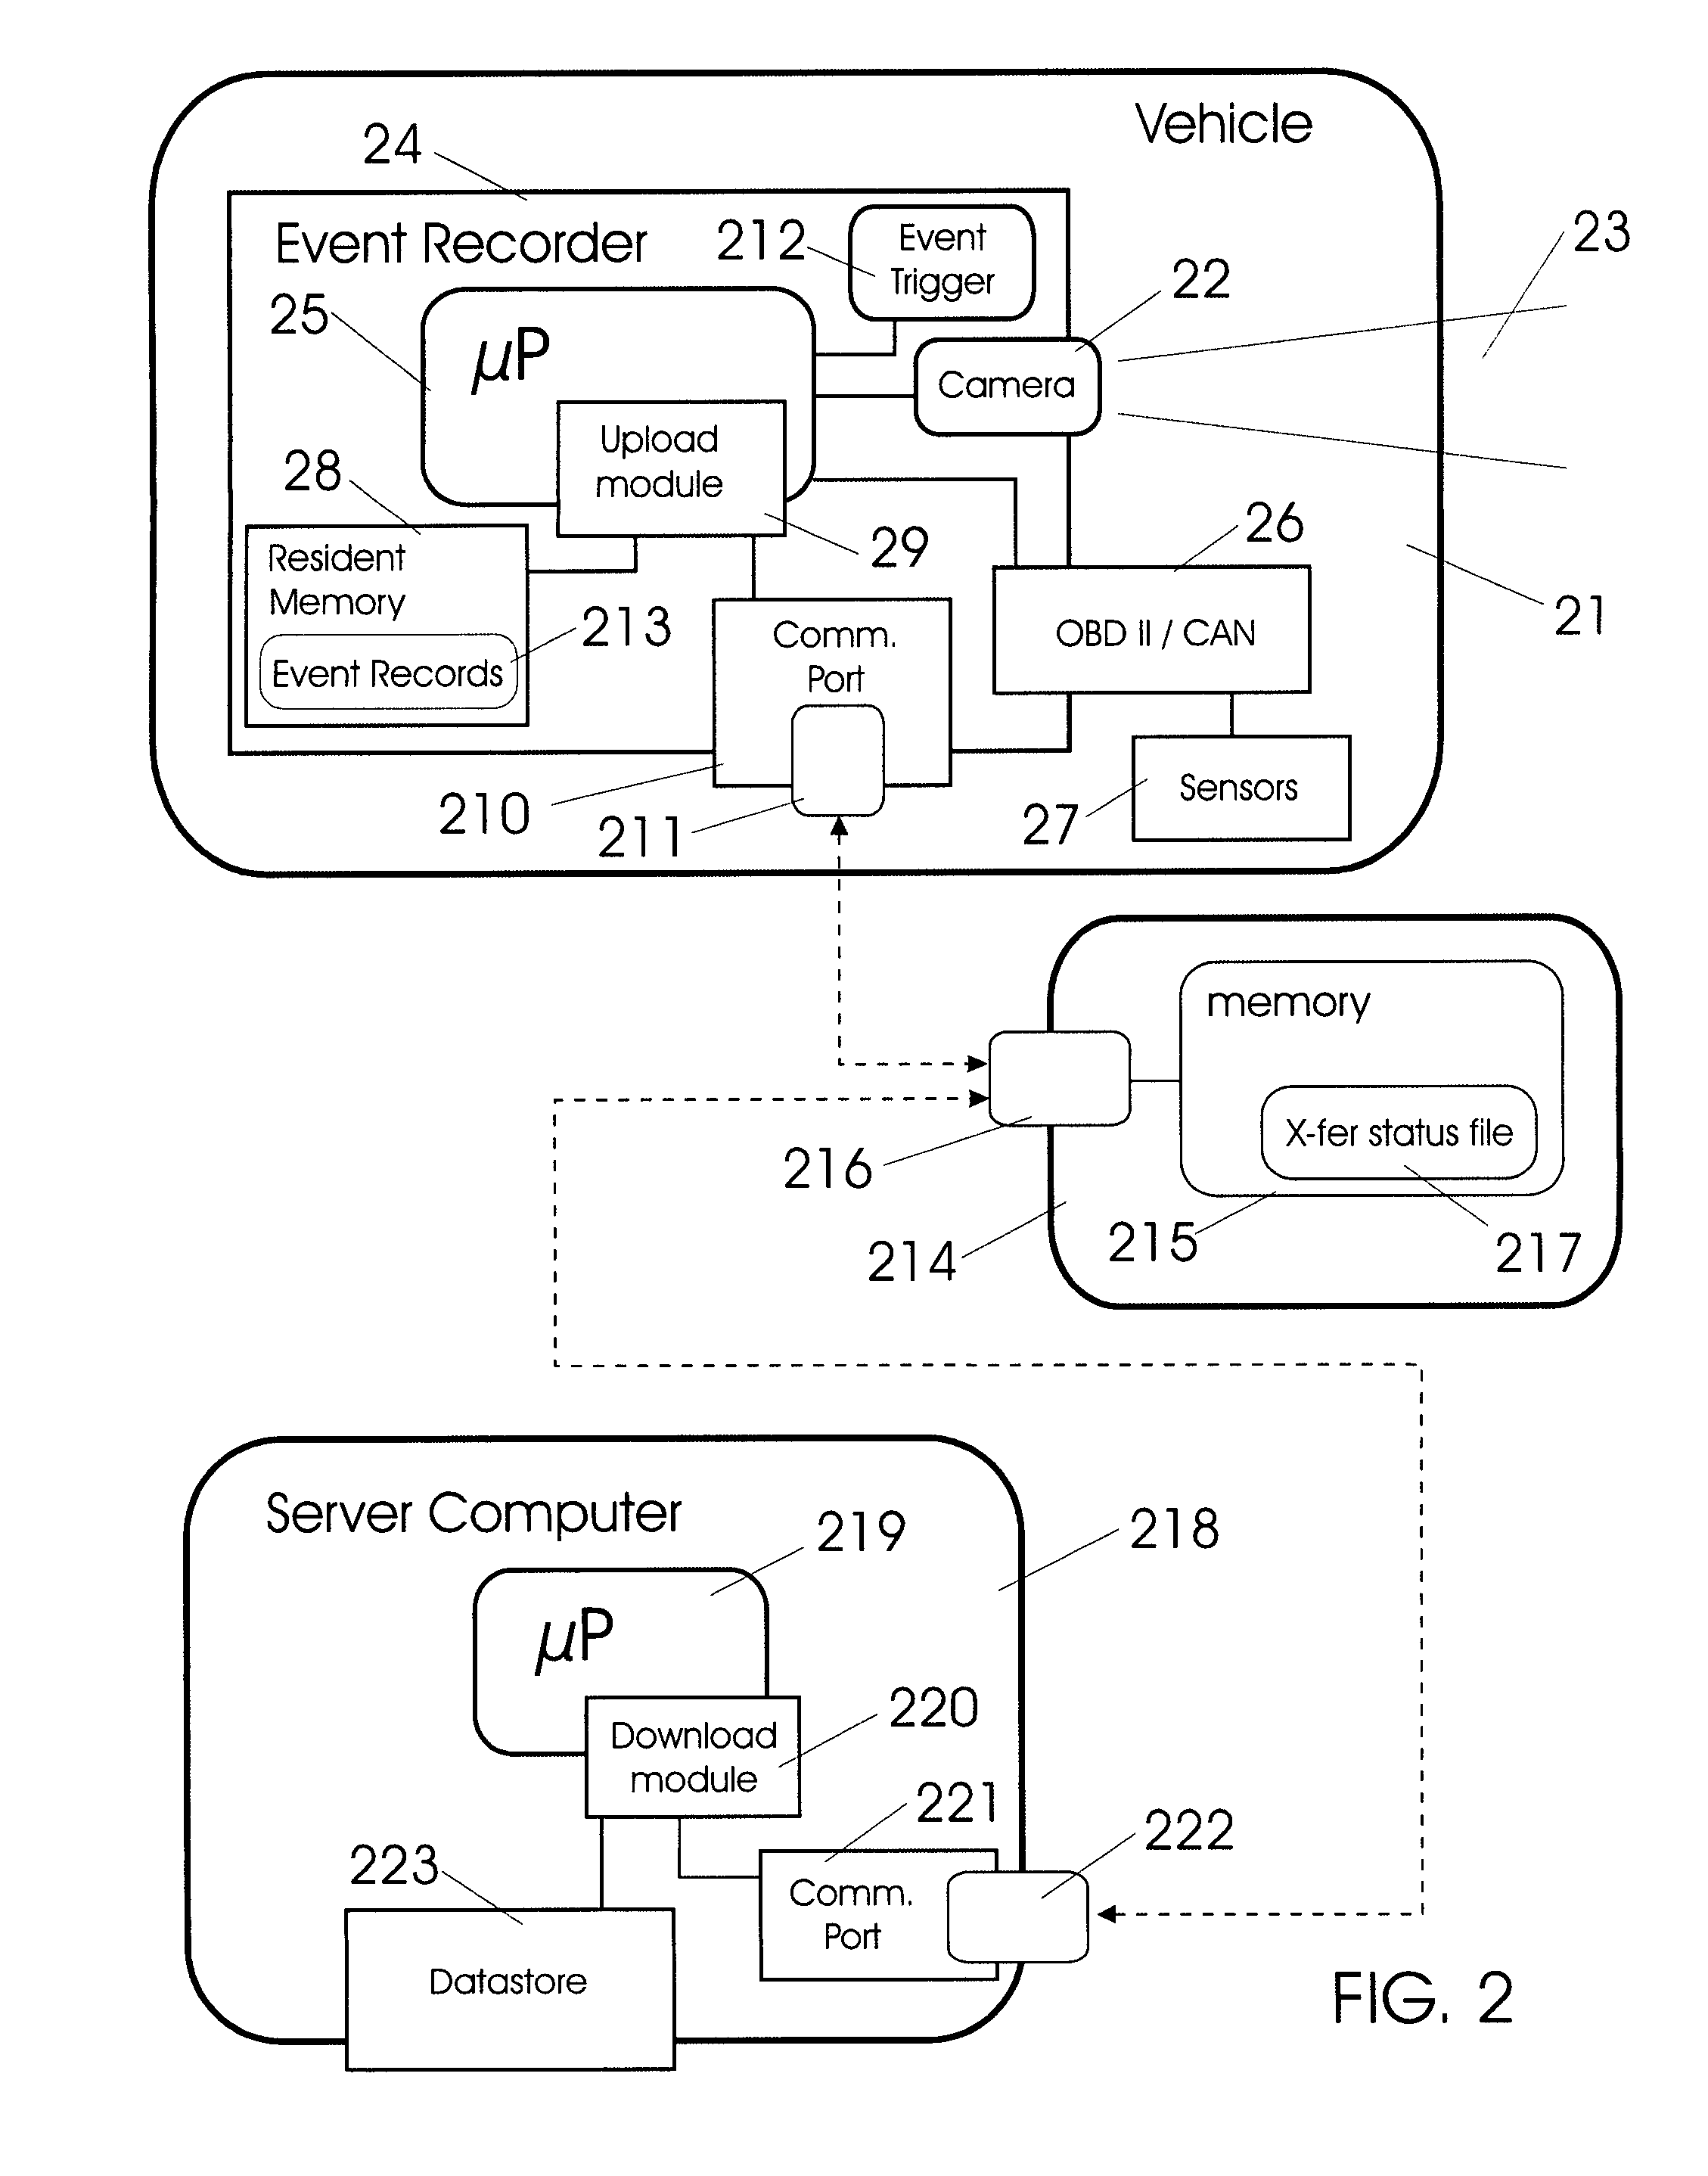 Distributed vehicle event recorder systems having a portable memory data transfer system